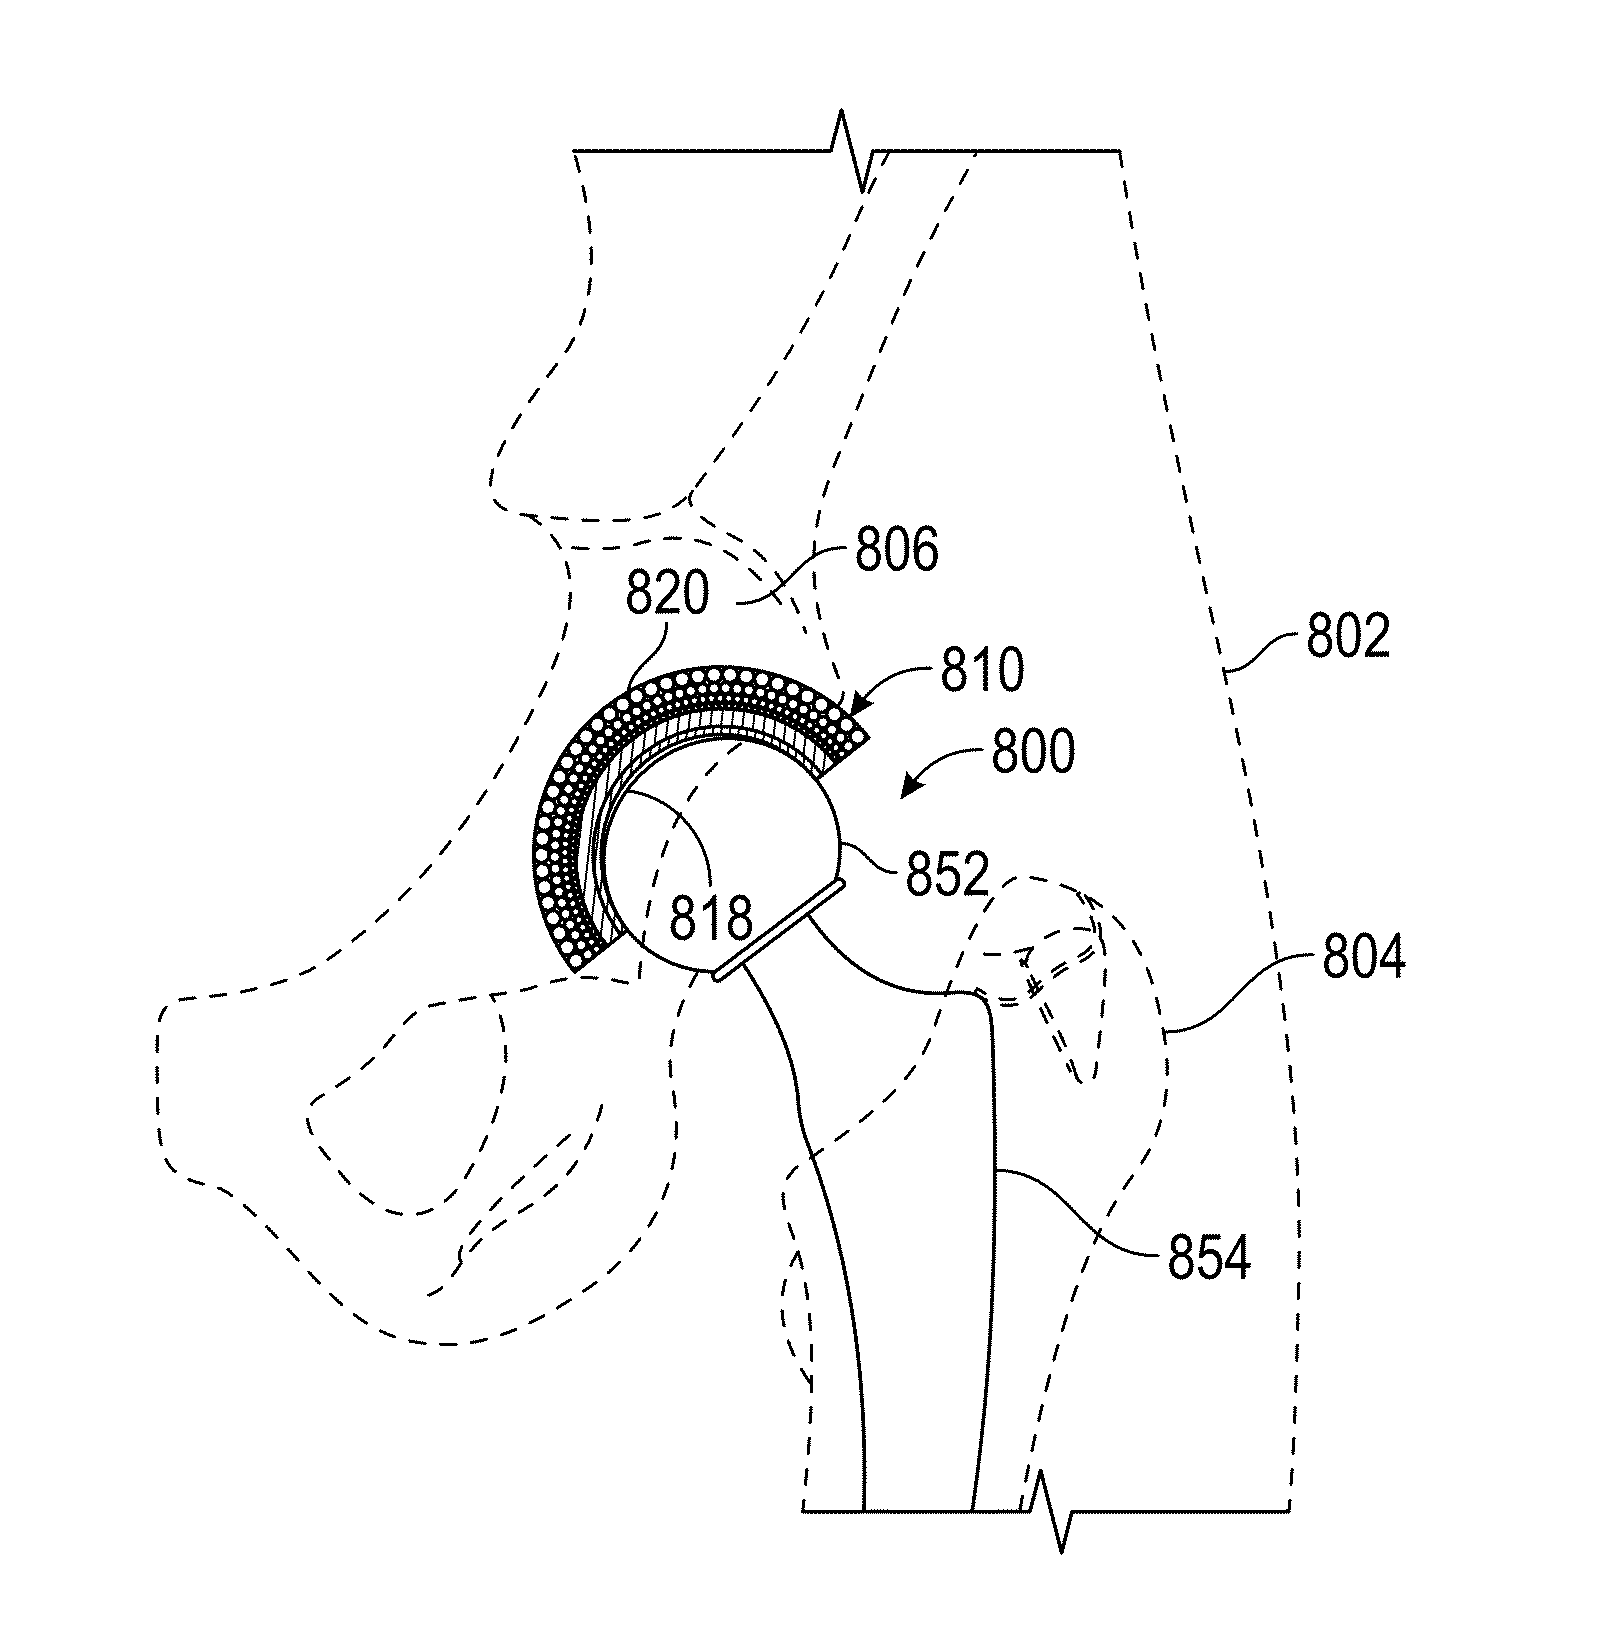 Joint Replacement or Joint Resurfacing Devices, Systems and Methods